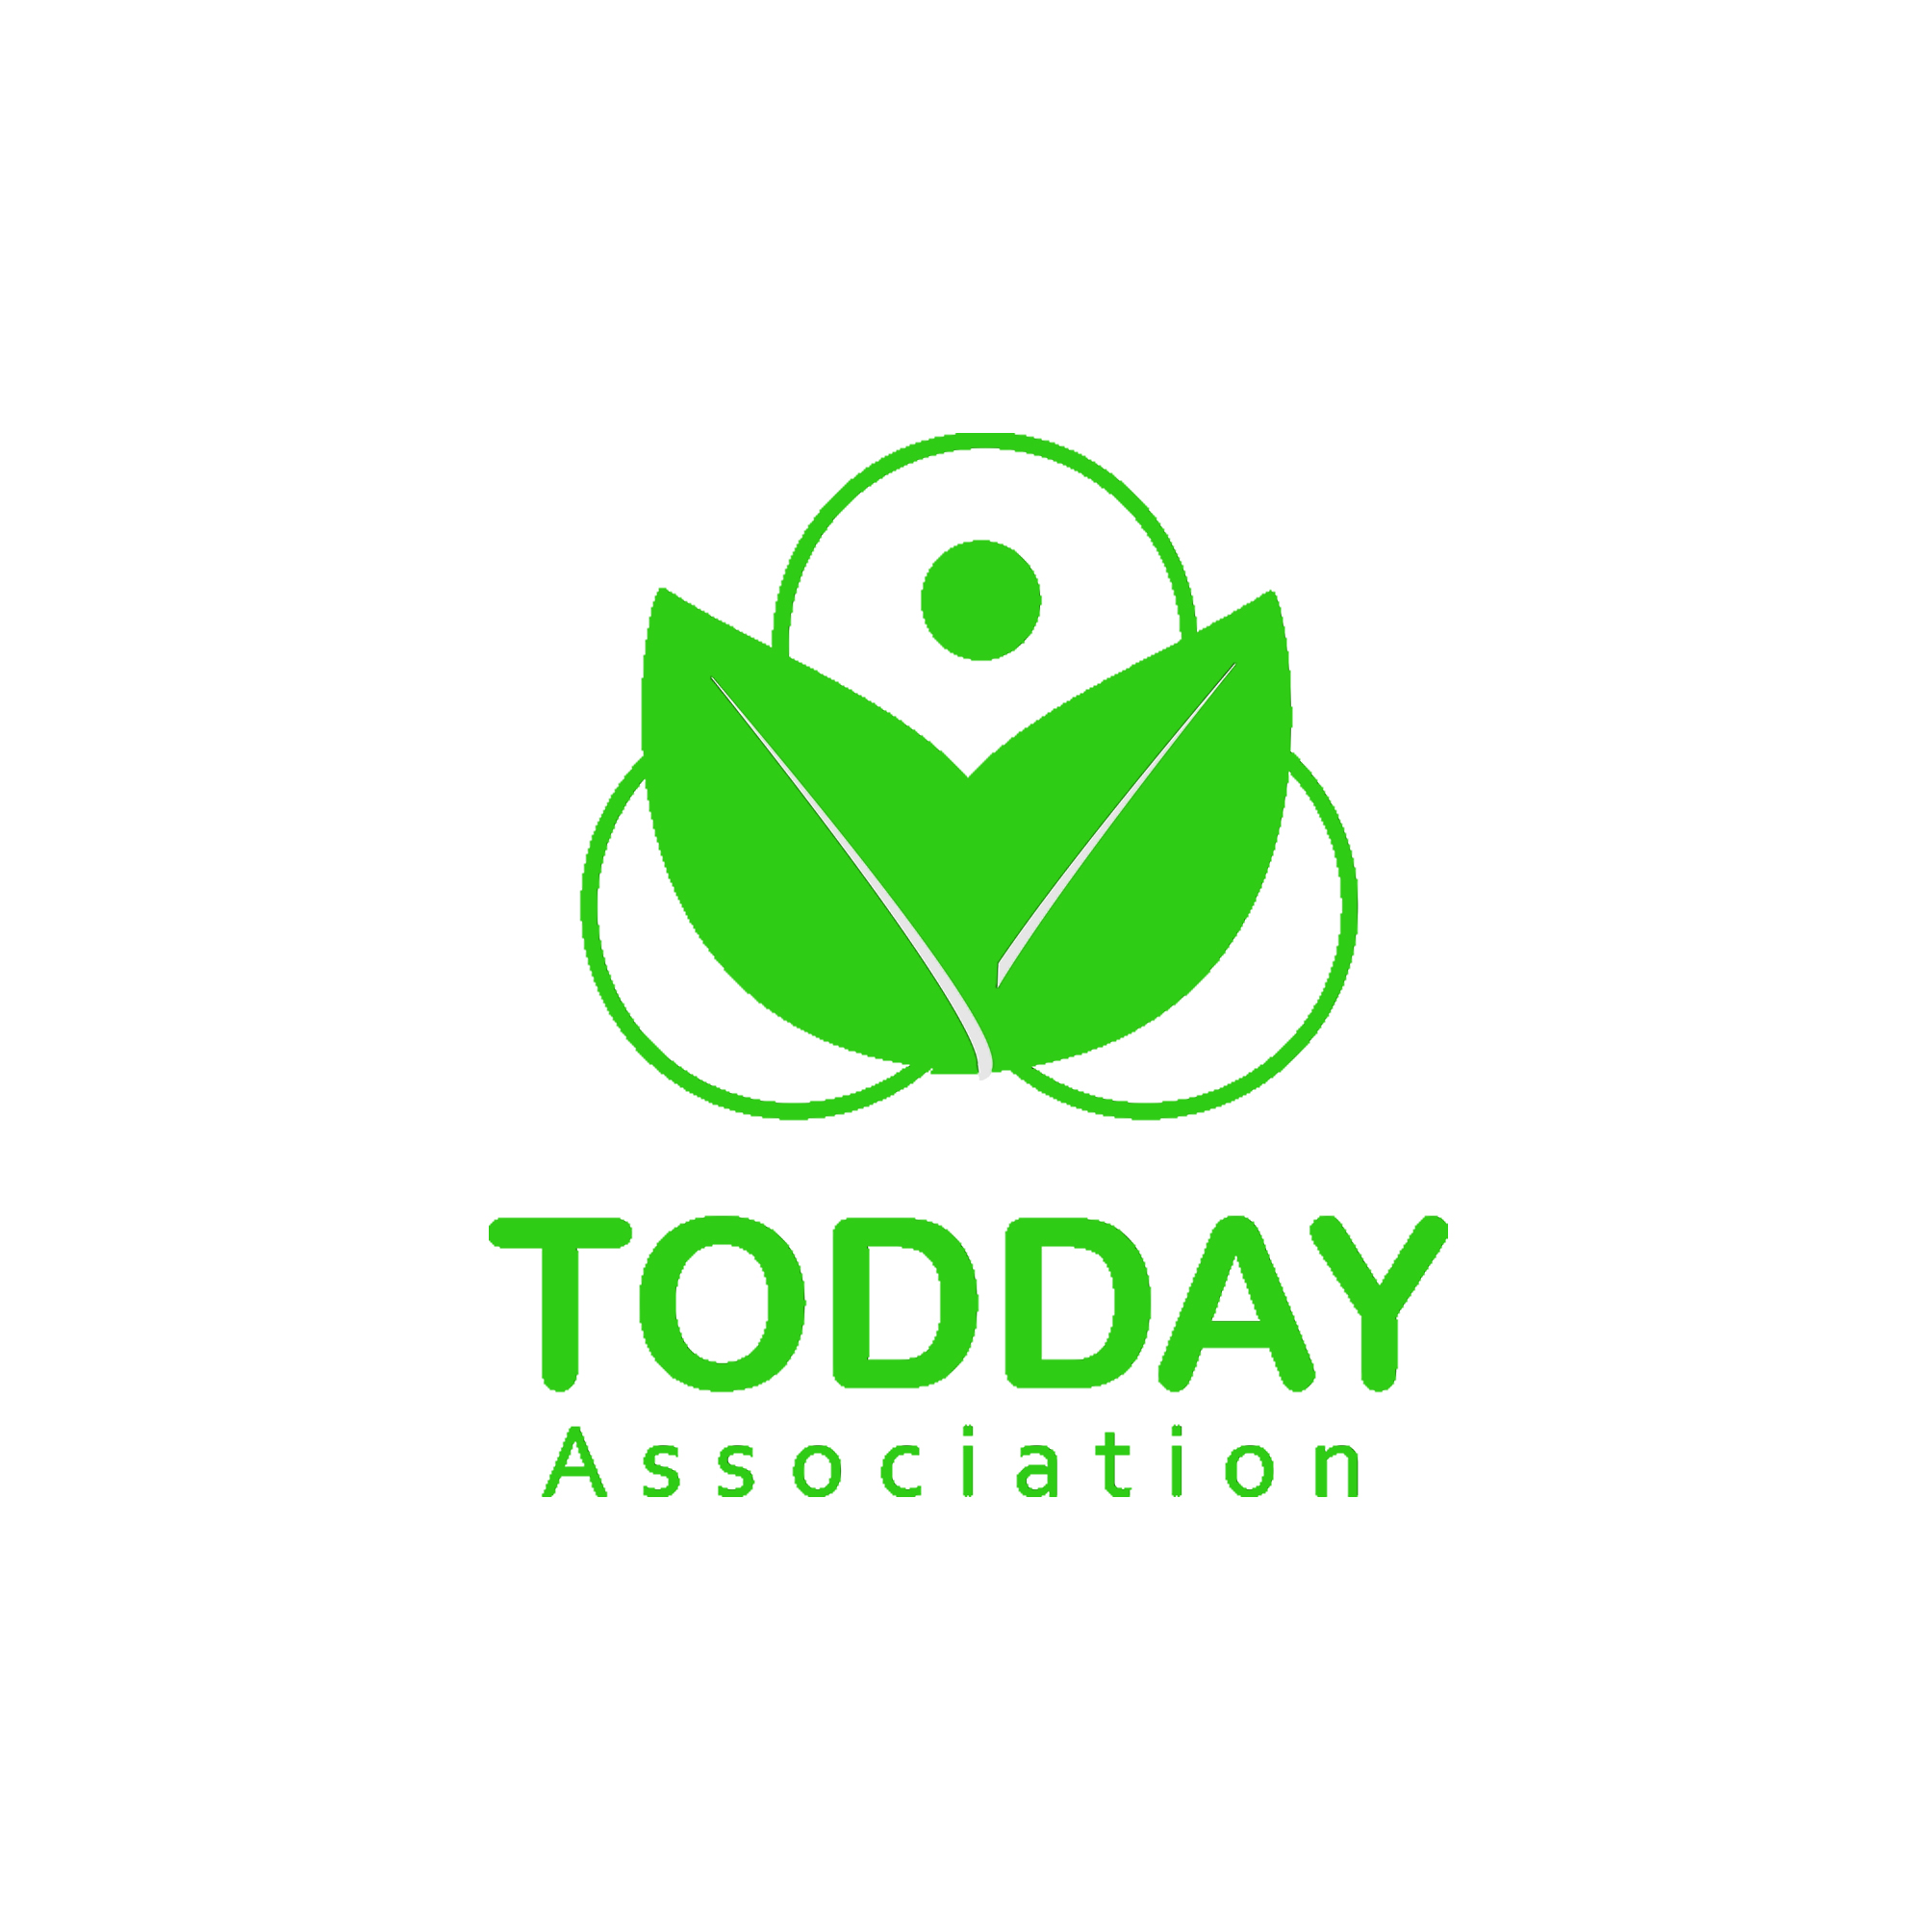 Todday association